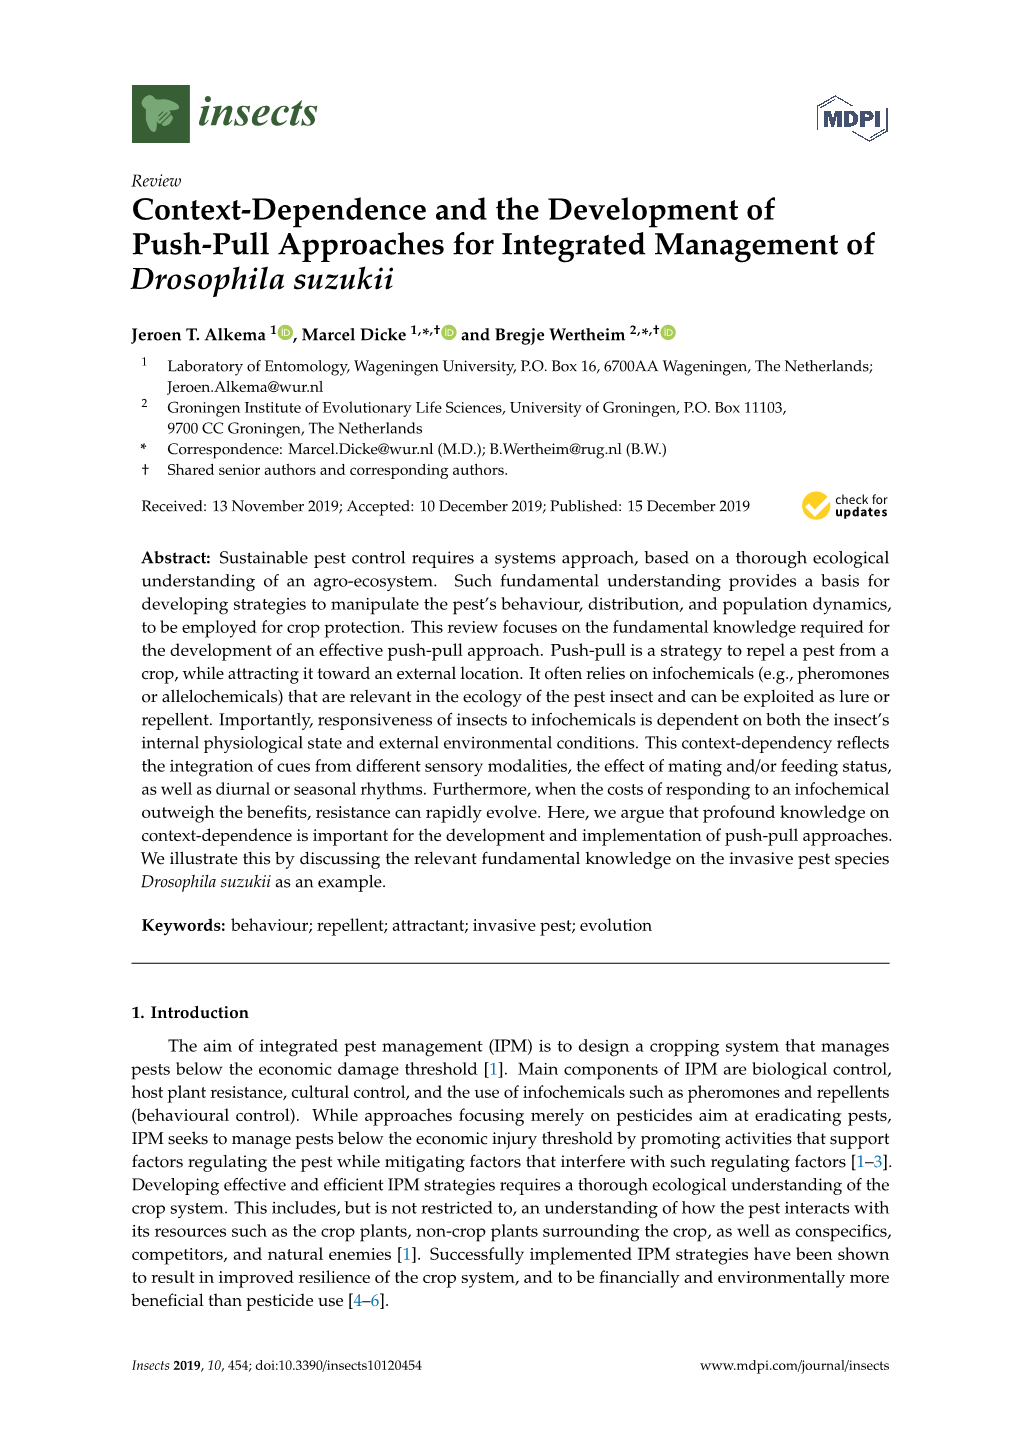 Context-Dependence and the Development of Push-Pull Approaches for Integrated Management of Drosophila Suzukii